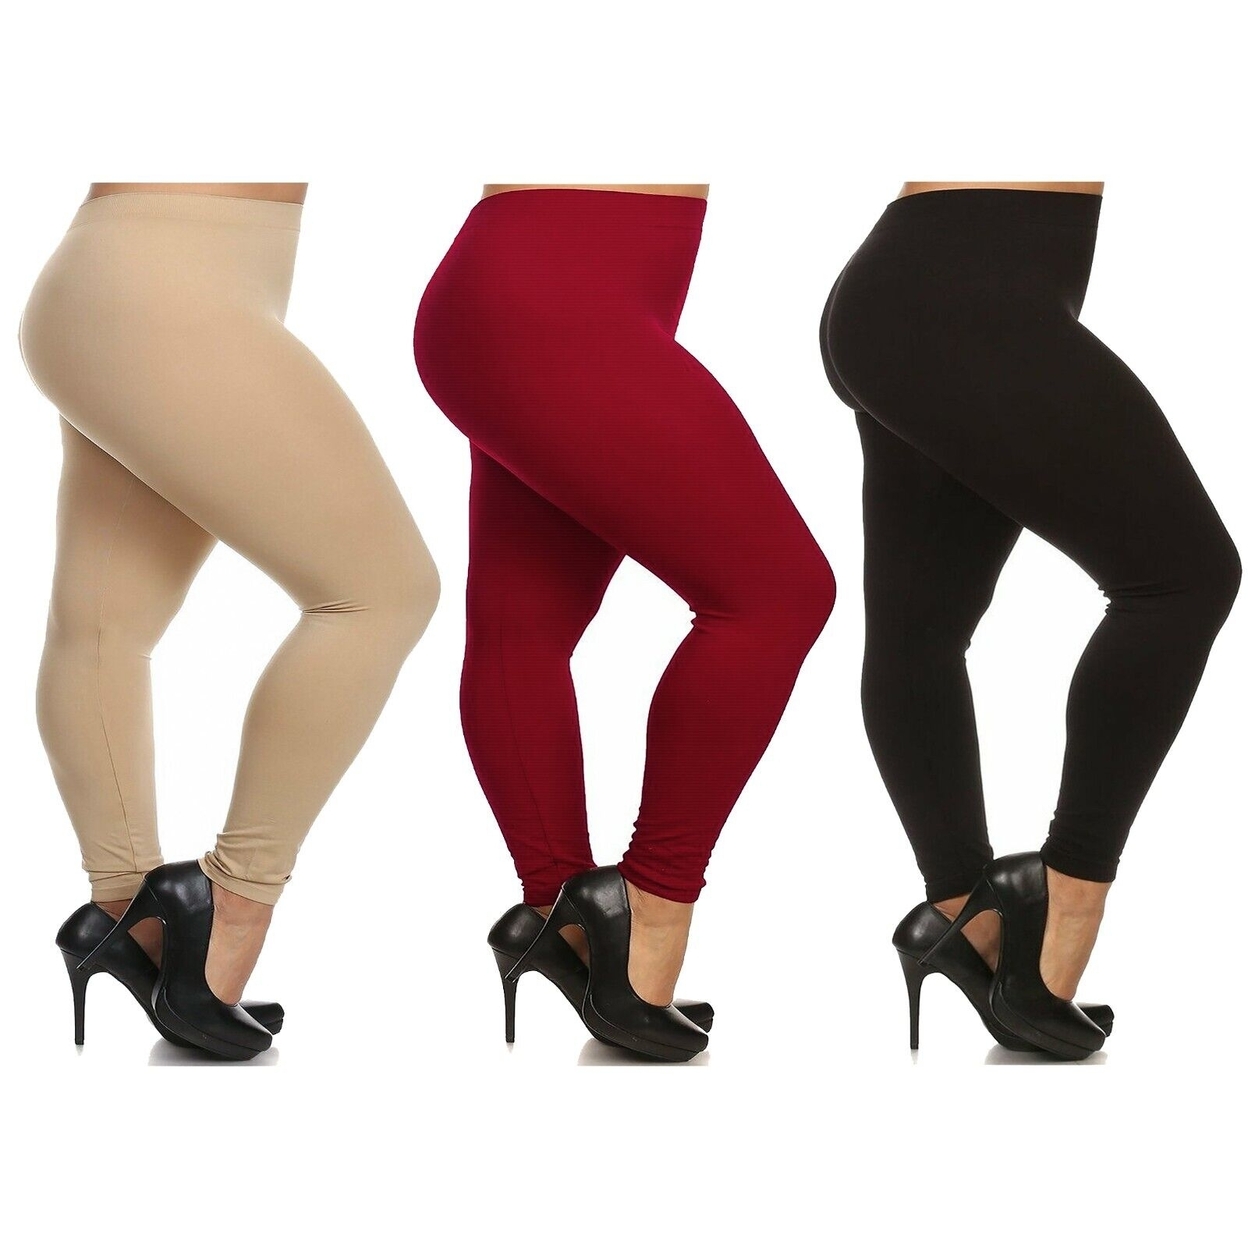 3-Pack: Women's Casual Ultra-Soft Smooth High Waisted Athletic Active Yoga Leggings Plus Size Available - Black,black,black, 4x